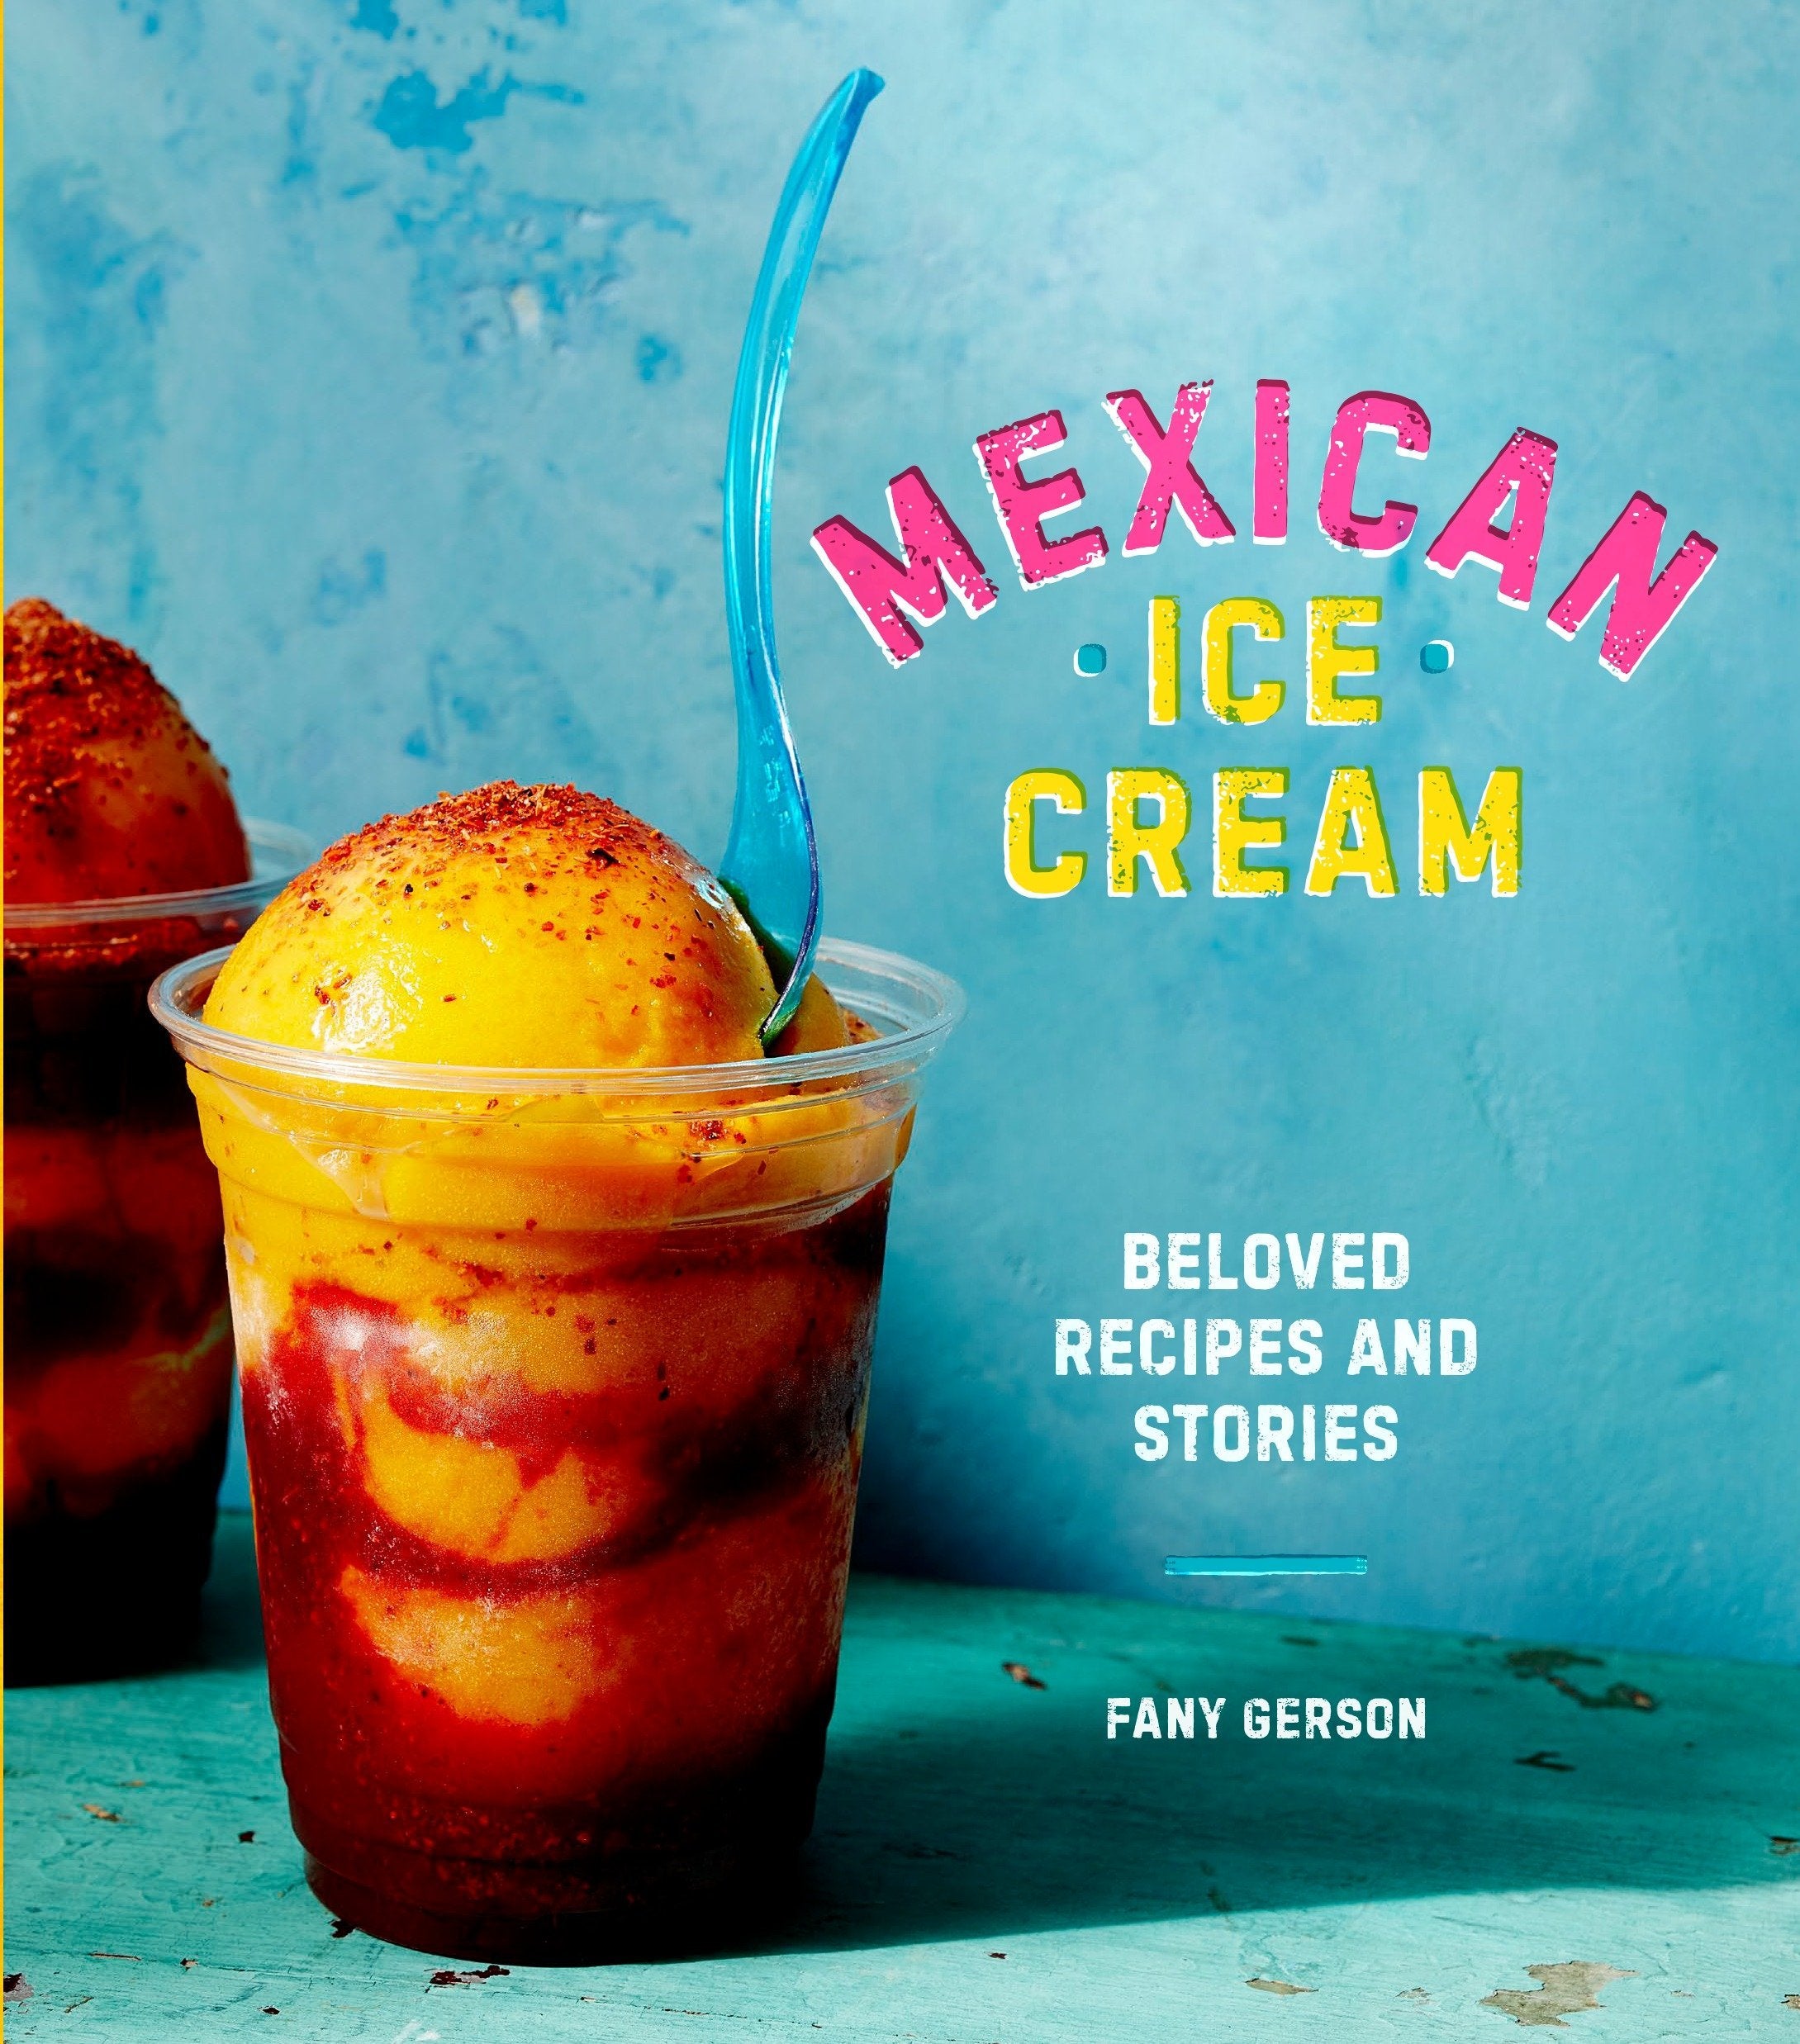 Mexican Ice Cream: Beloved Recipes and Stories (Fany Gerson)